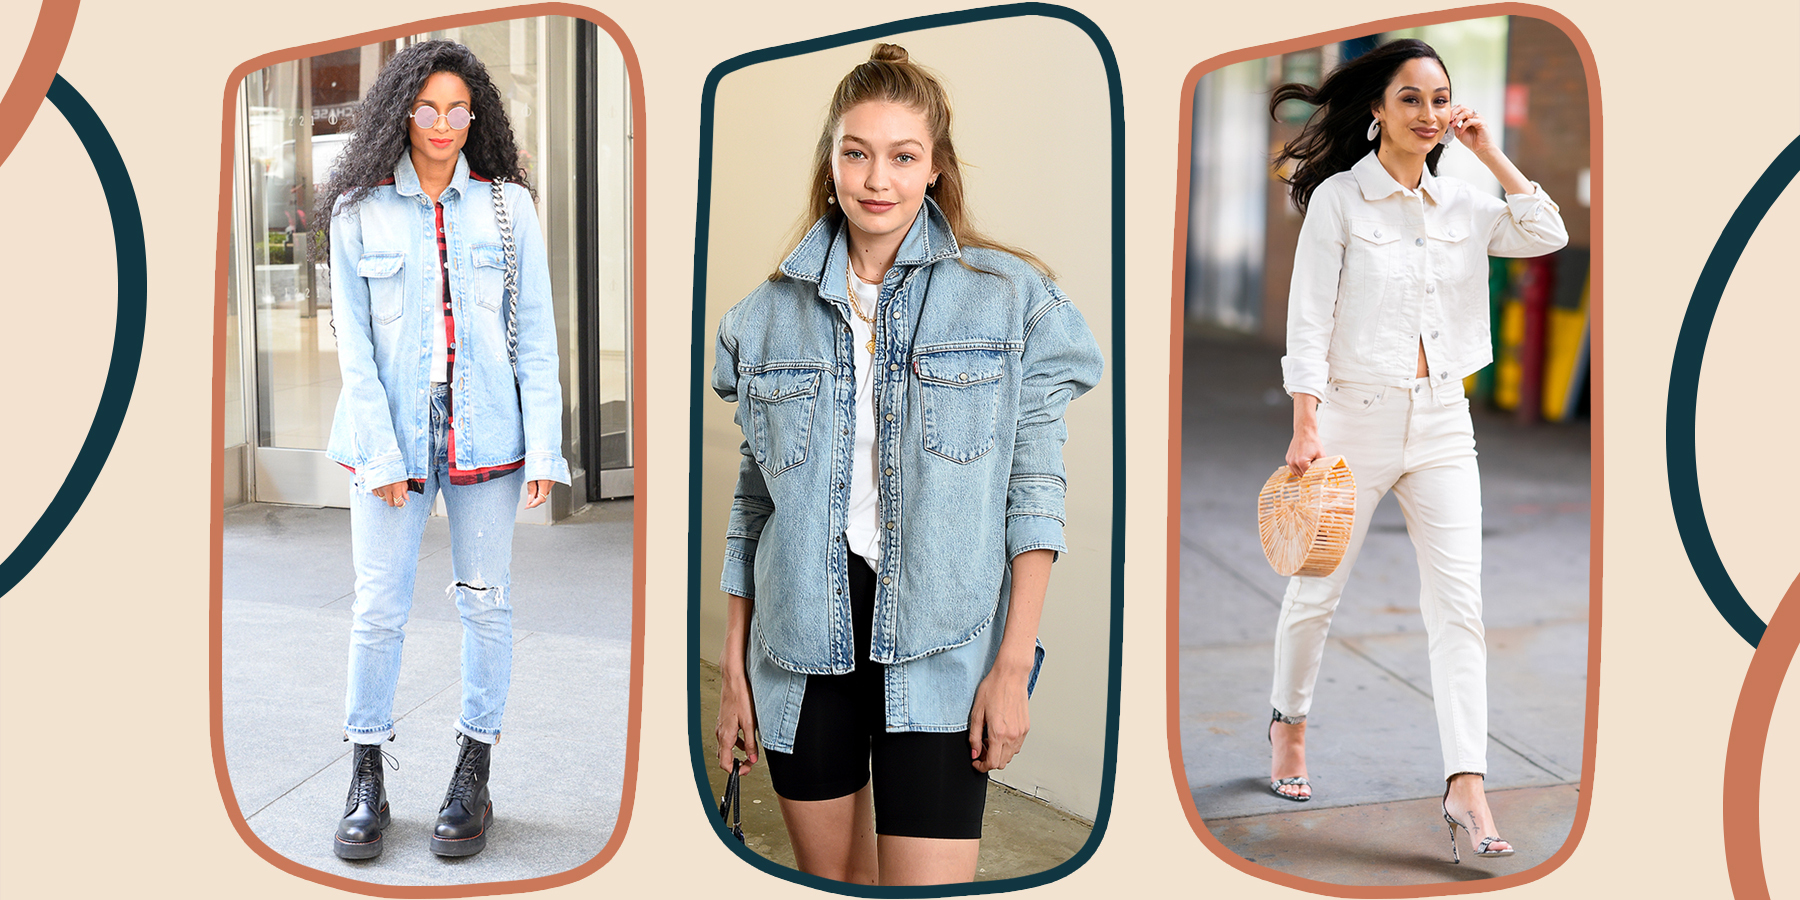 7 ways to style jeans and a blazer for everyday dressing